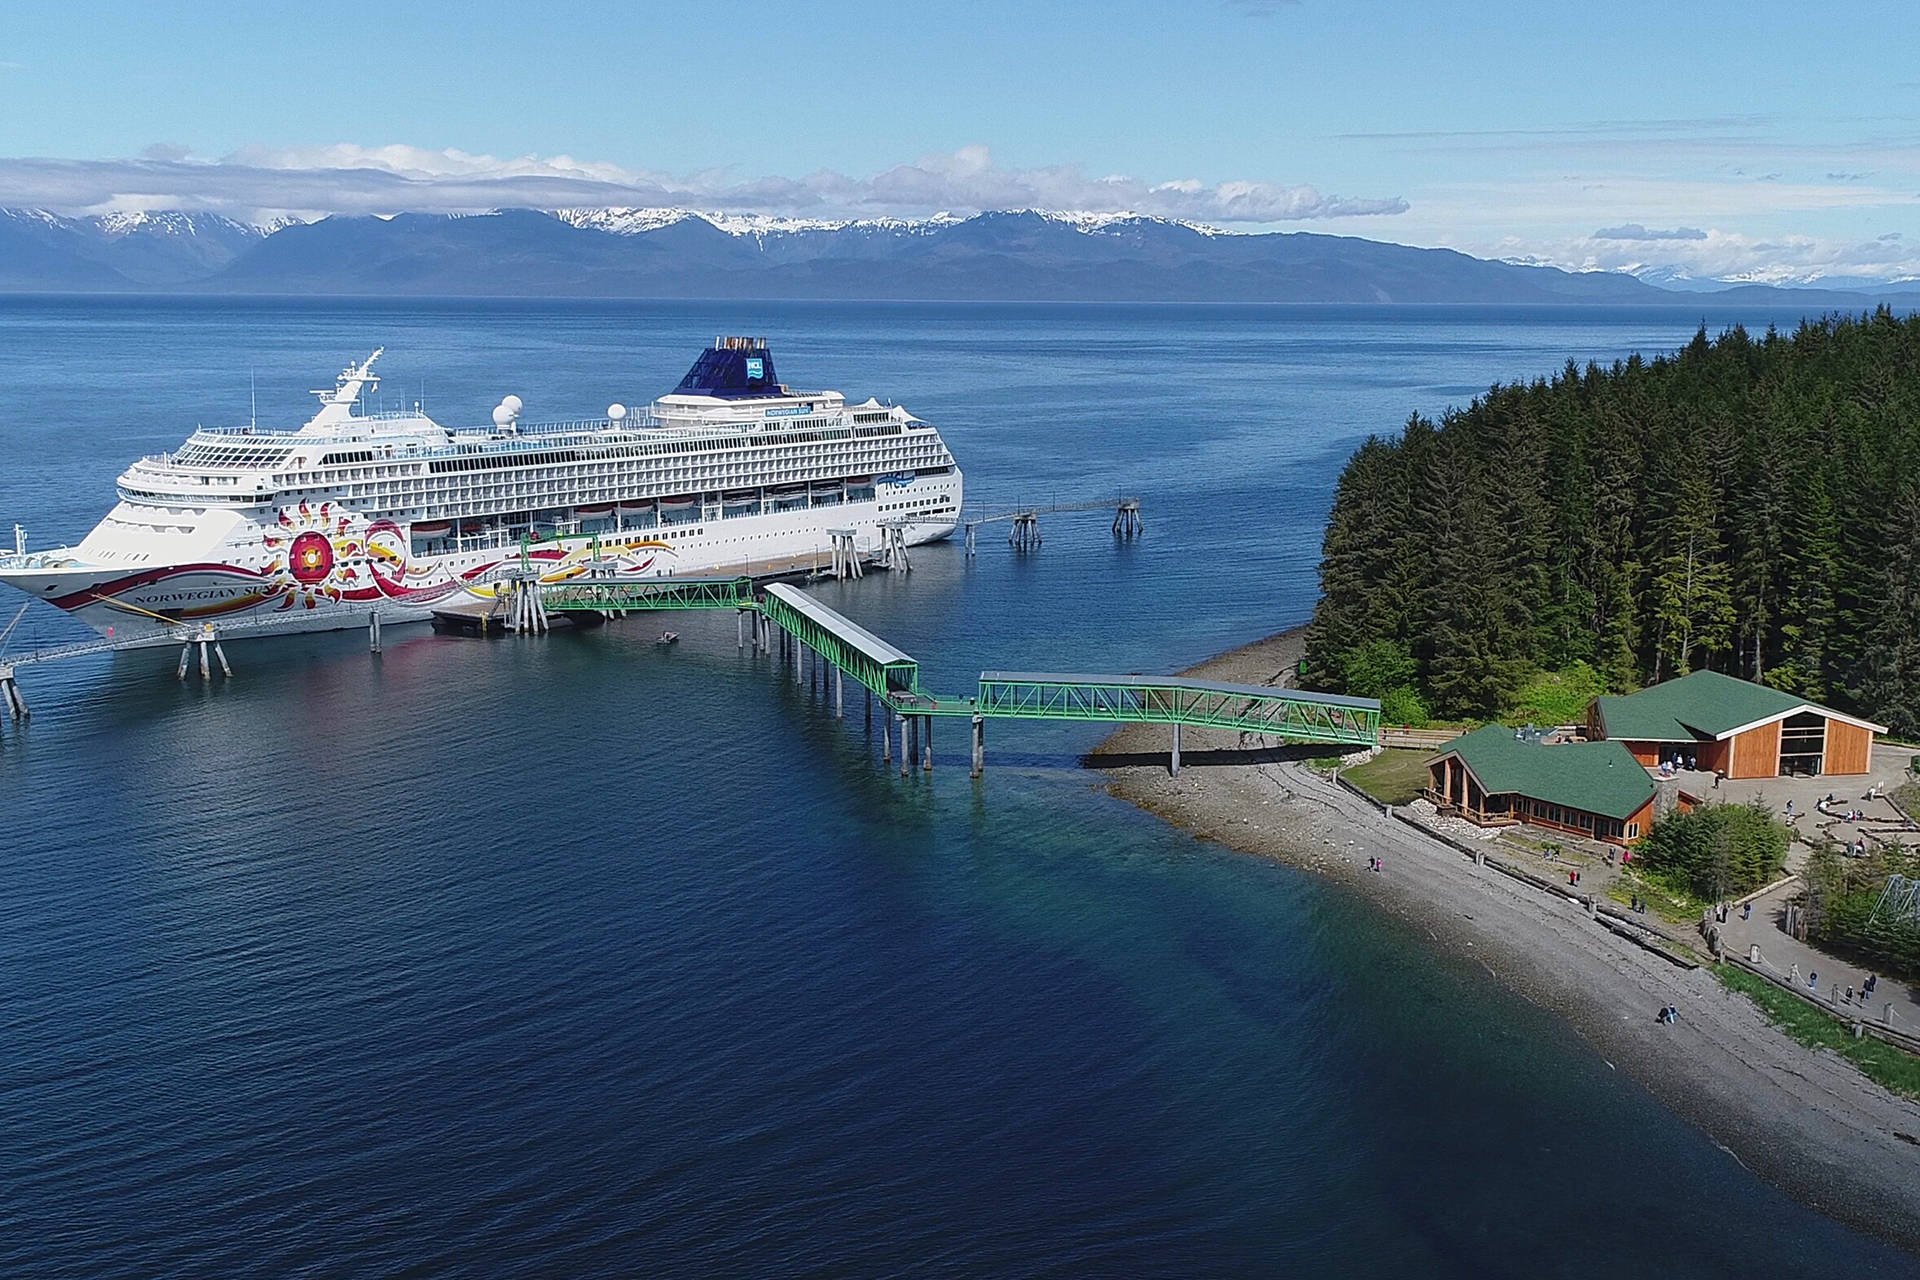 Small town, big ships: More cruise ships headed to Hoonah